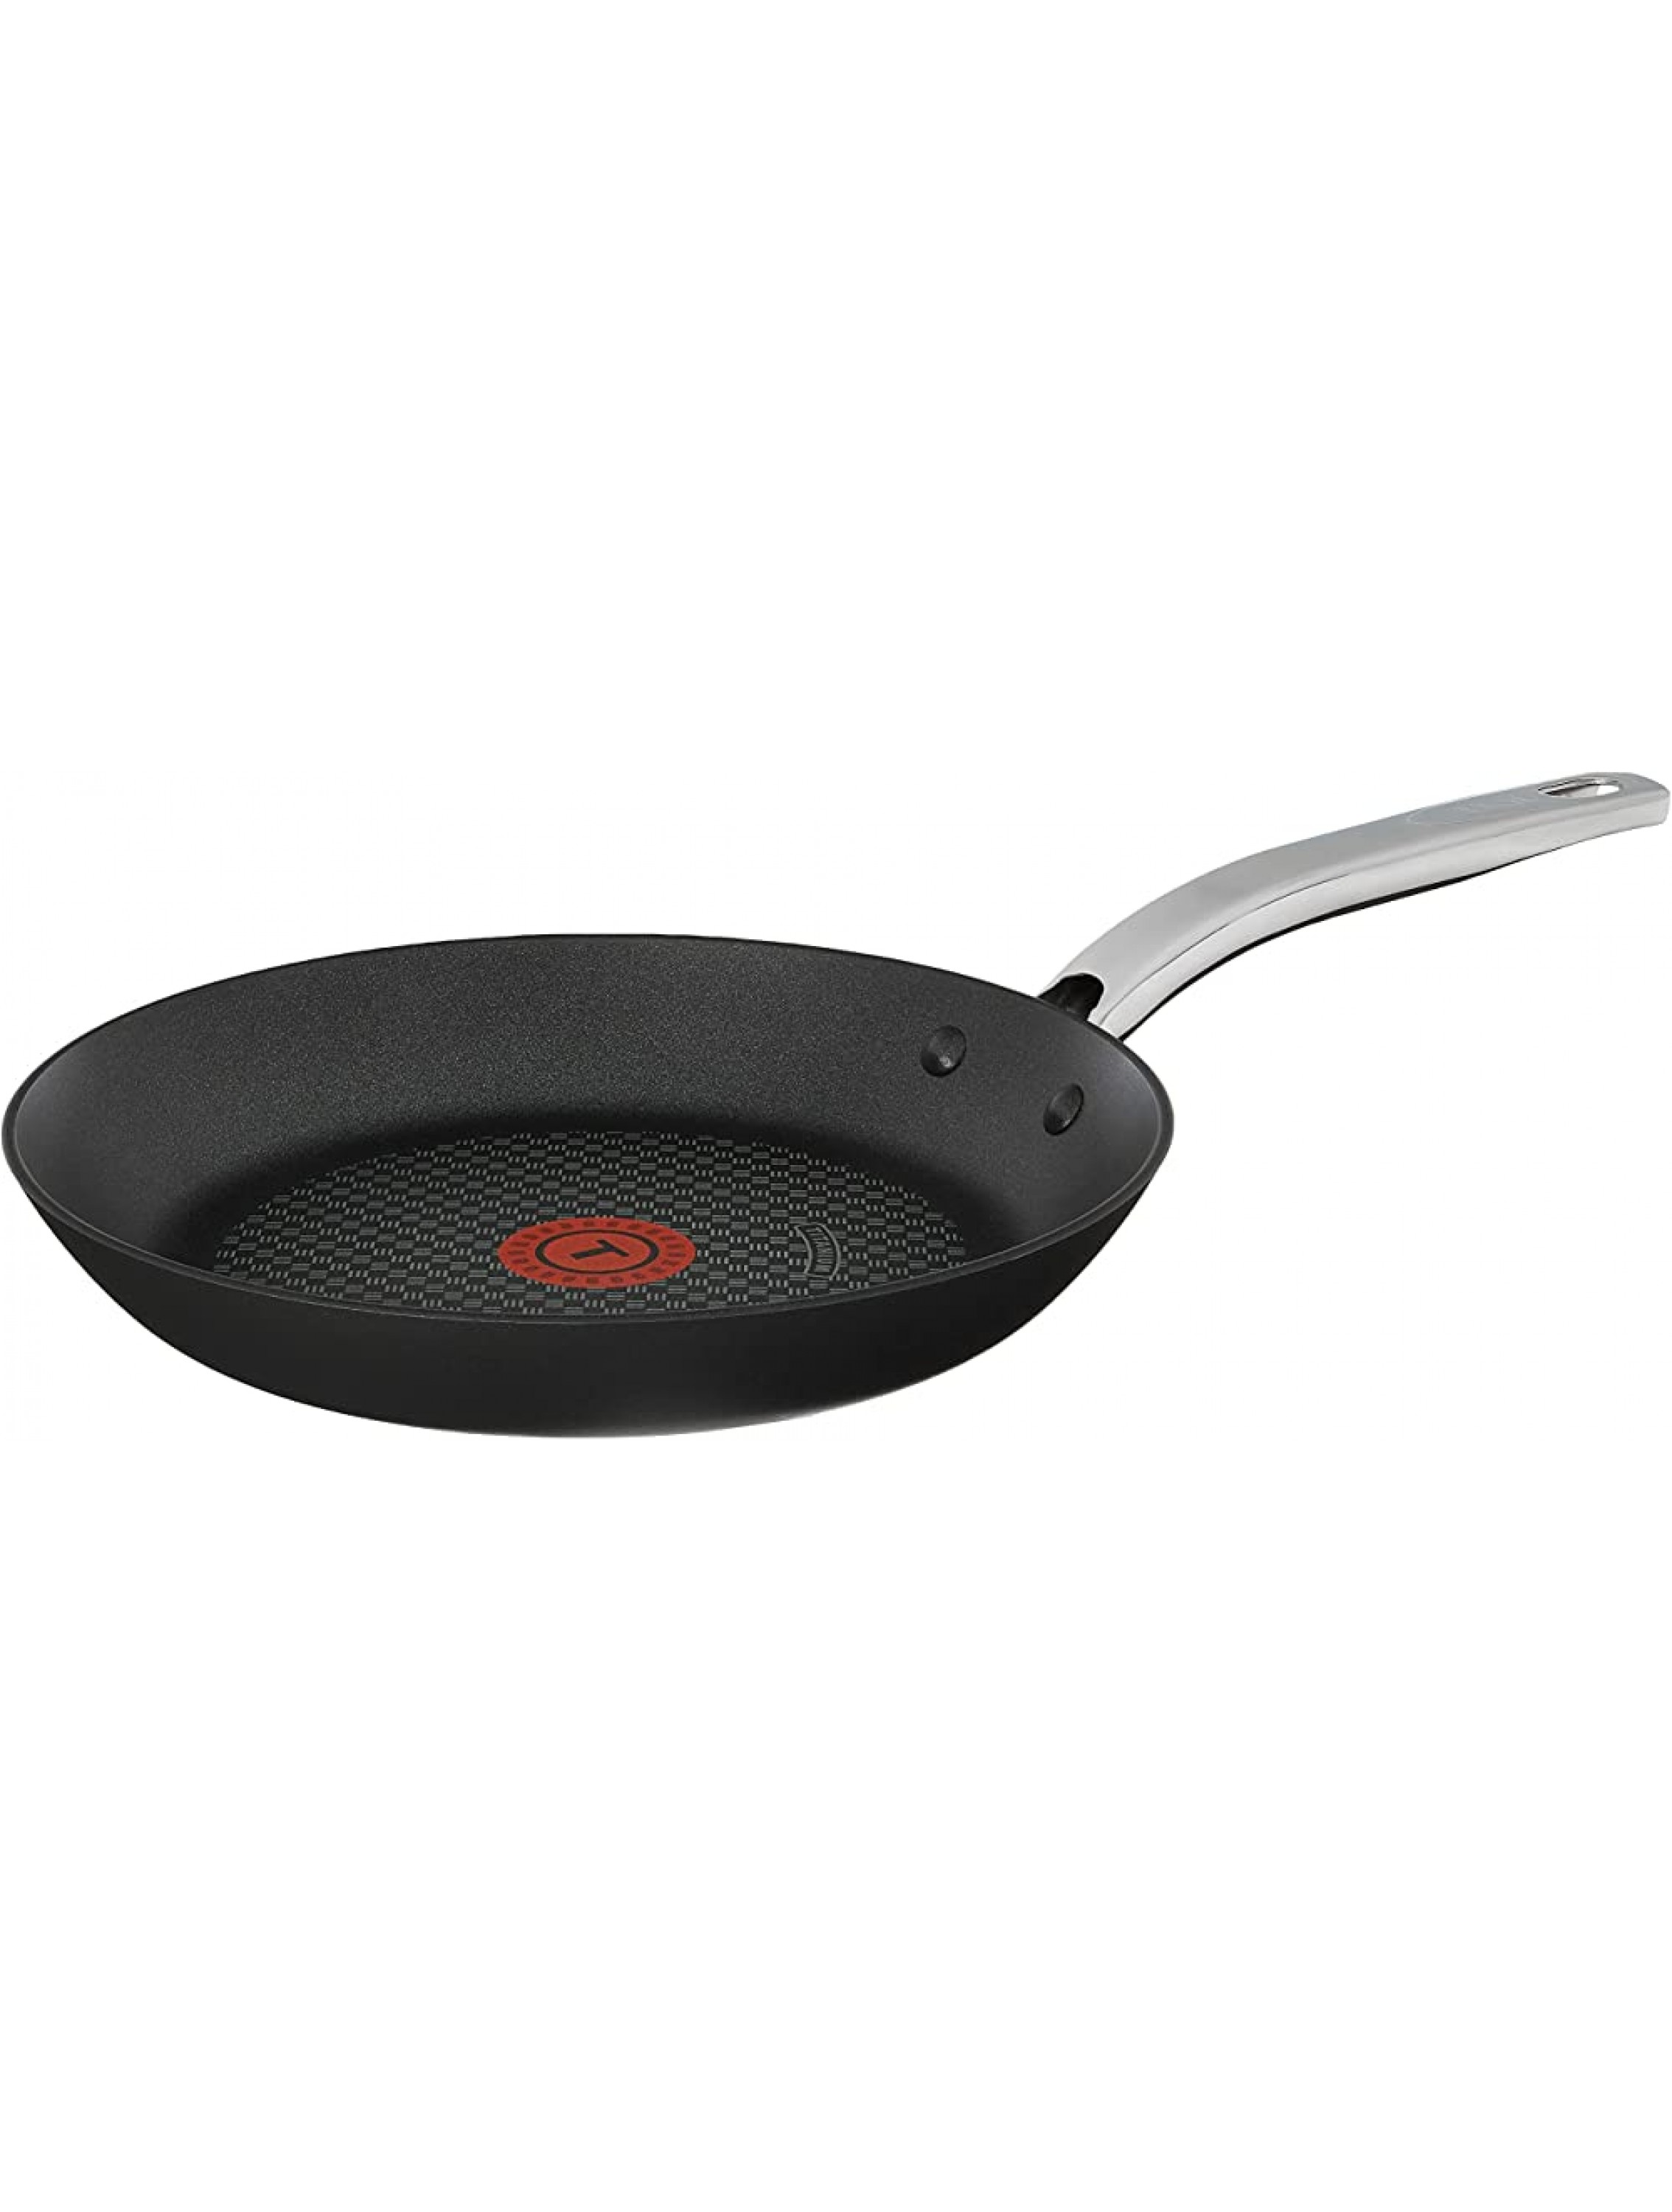 T-fal C51705 ProGrade Titanium Nonstick Thermo-Spot Dishwasher Safe PFOA Free with Induction Base Fry Pan Cookware 10-Inch Black - - B6HFOAXCR